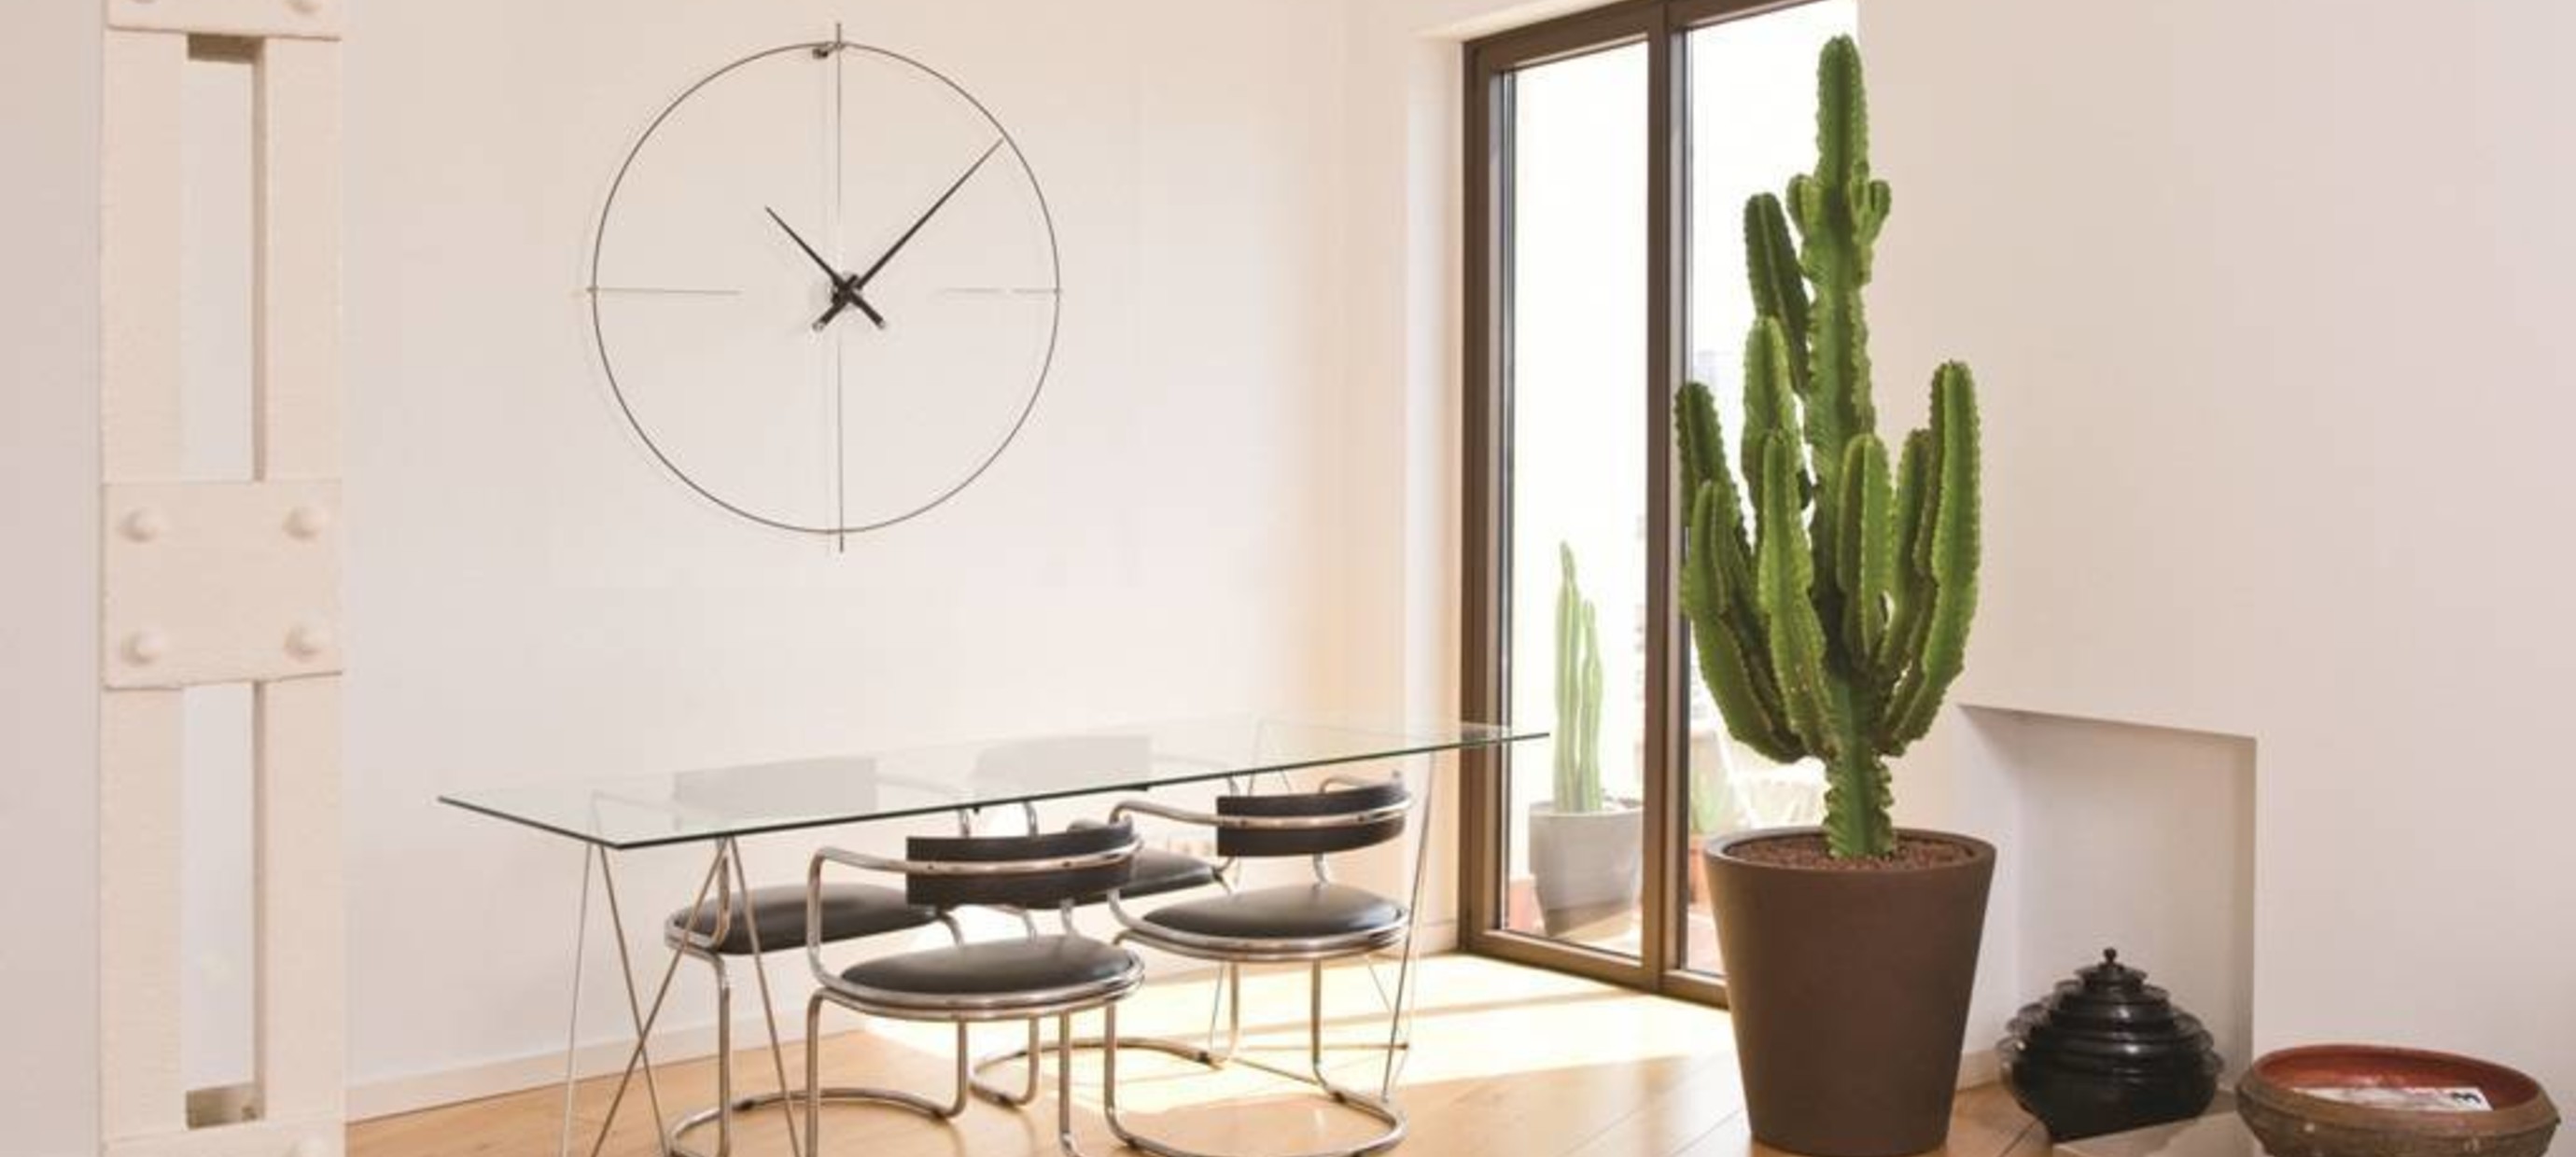 Large wall clocks in the interior